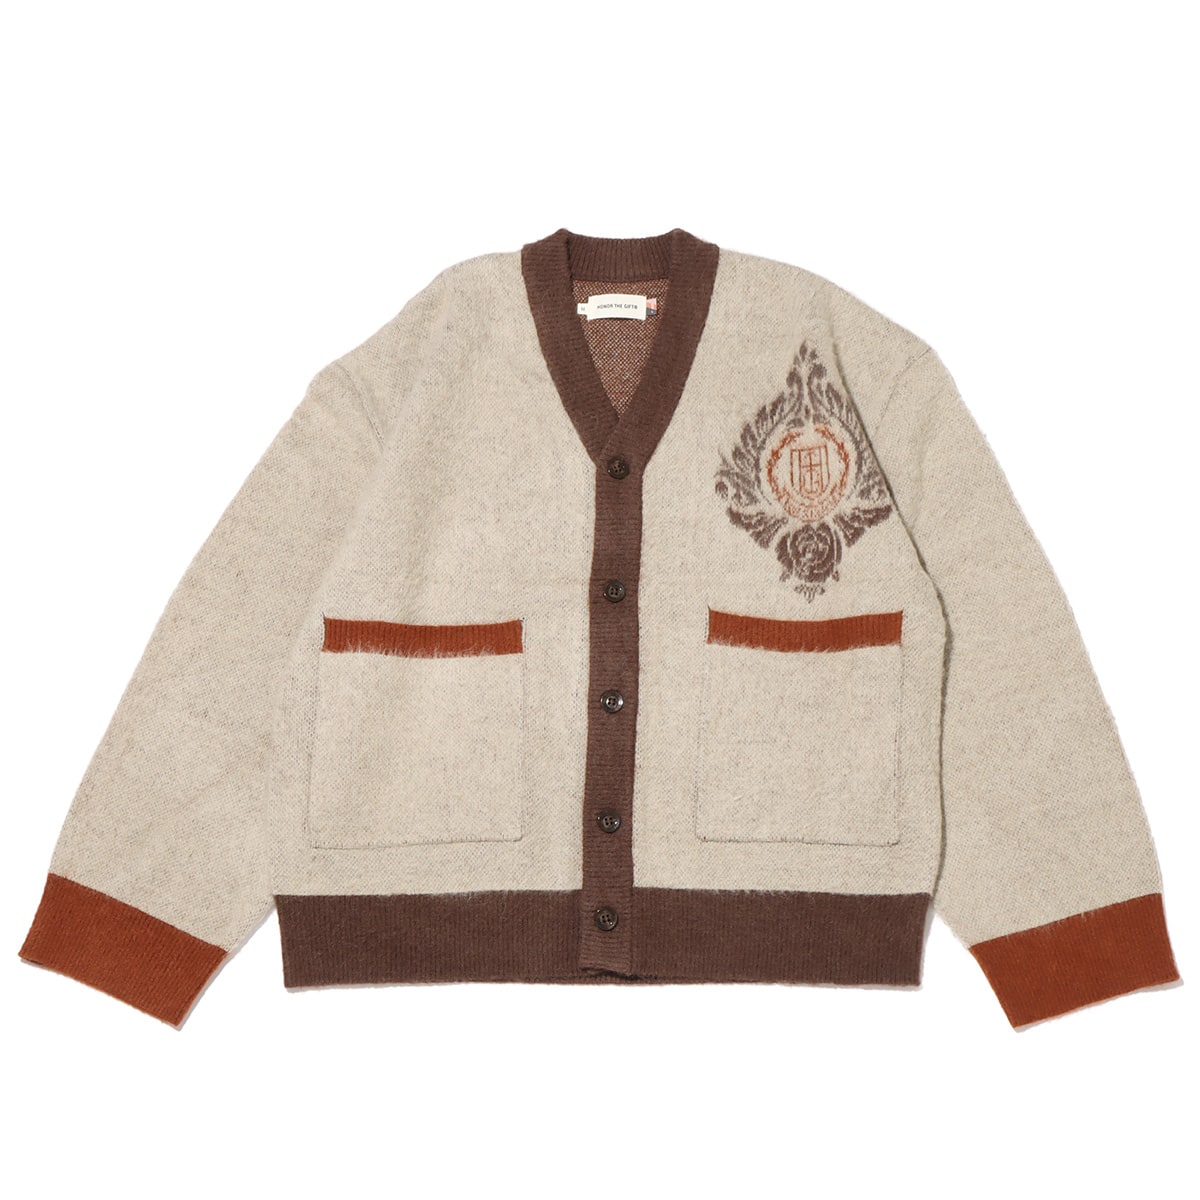 HONOR THE GIFT HTG CARDIGAN BROWN 23HO-I_photo_large